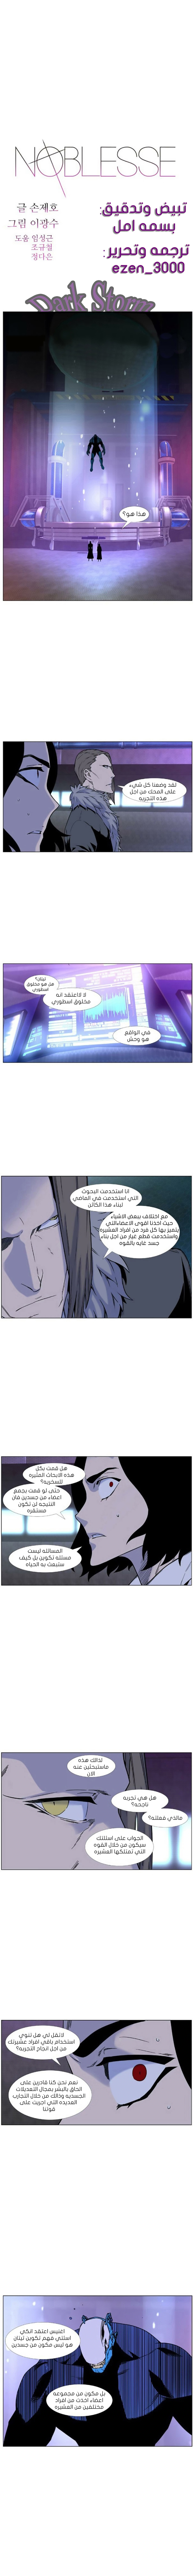 Noblesse: Chapter 446 - Page 1